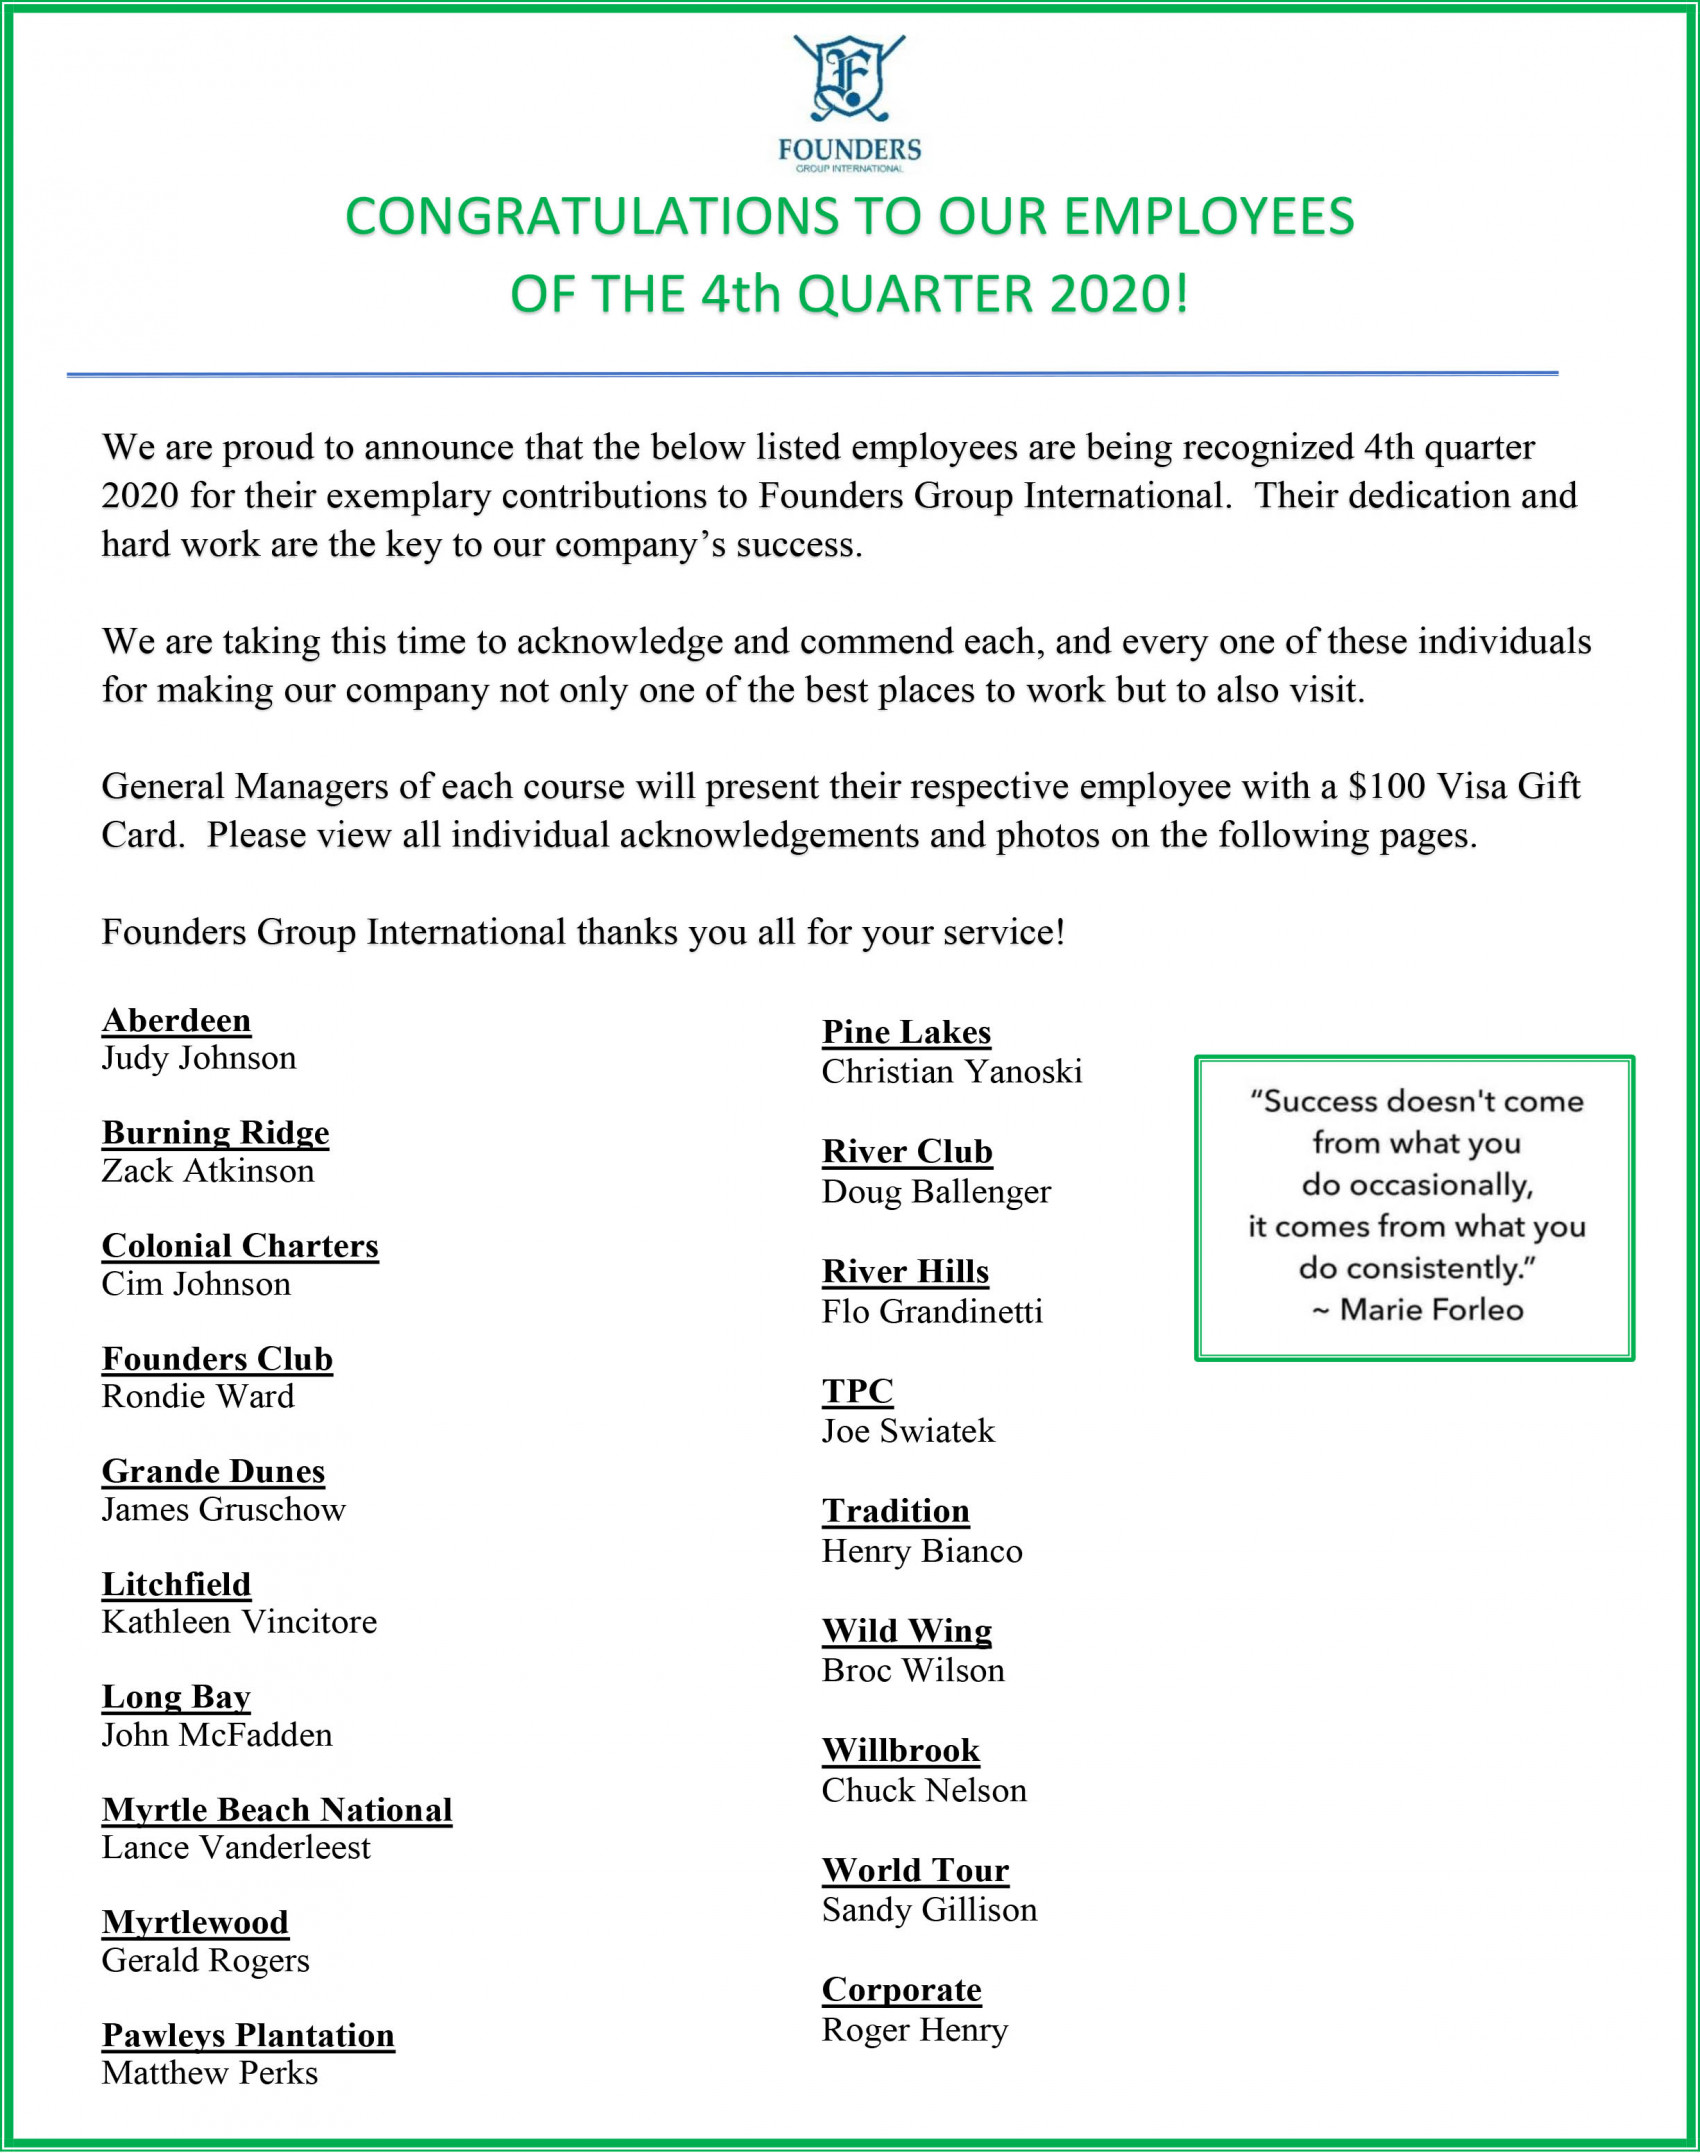 CONGRATULATIONS-TO-OUR-EMPLOYEES-4th-qrt-2020-1